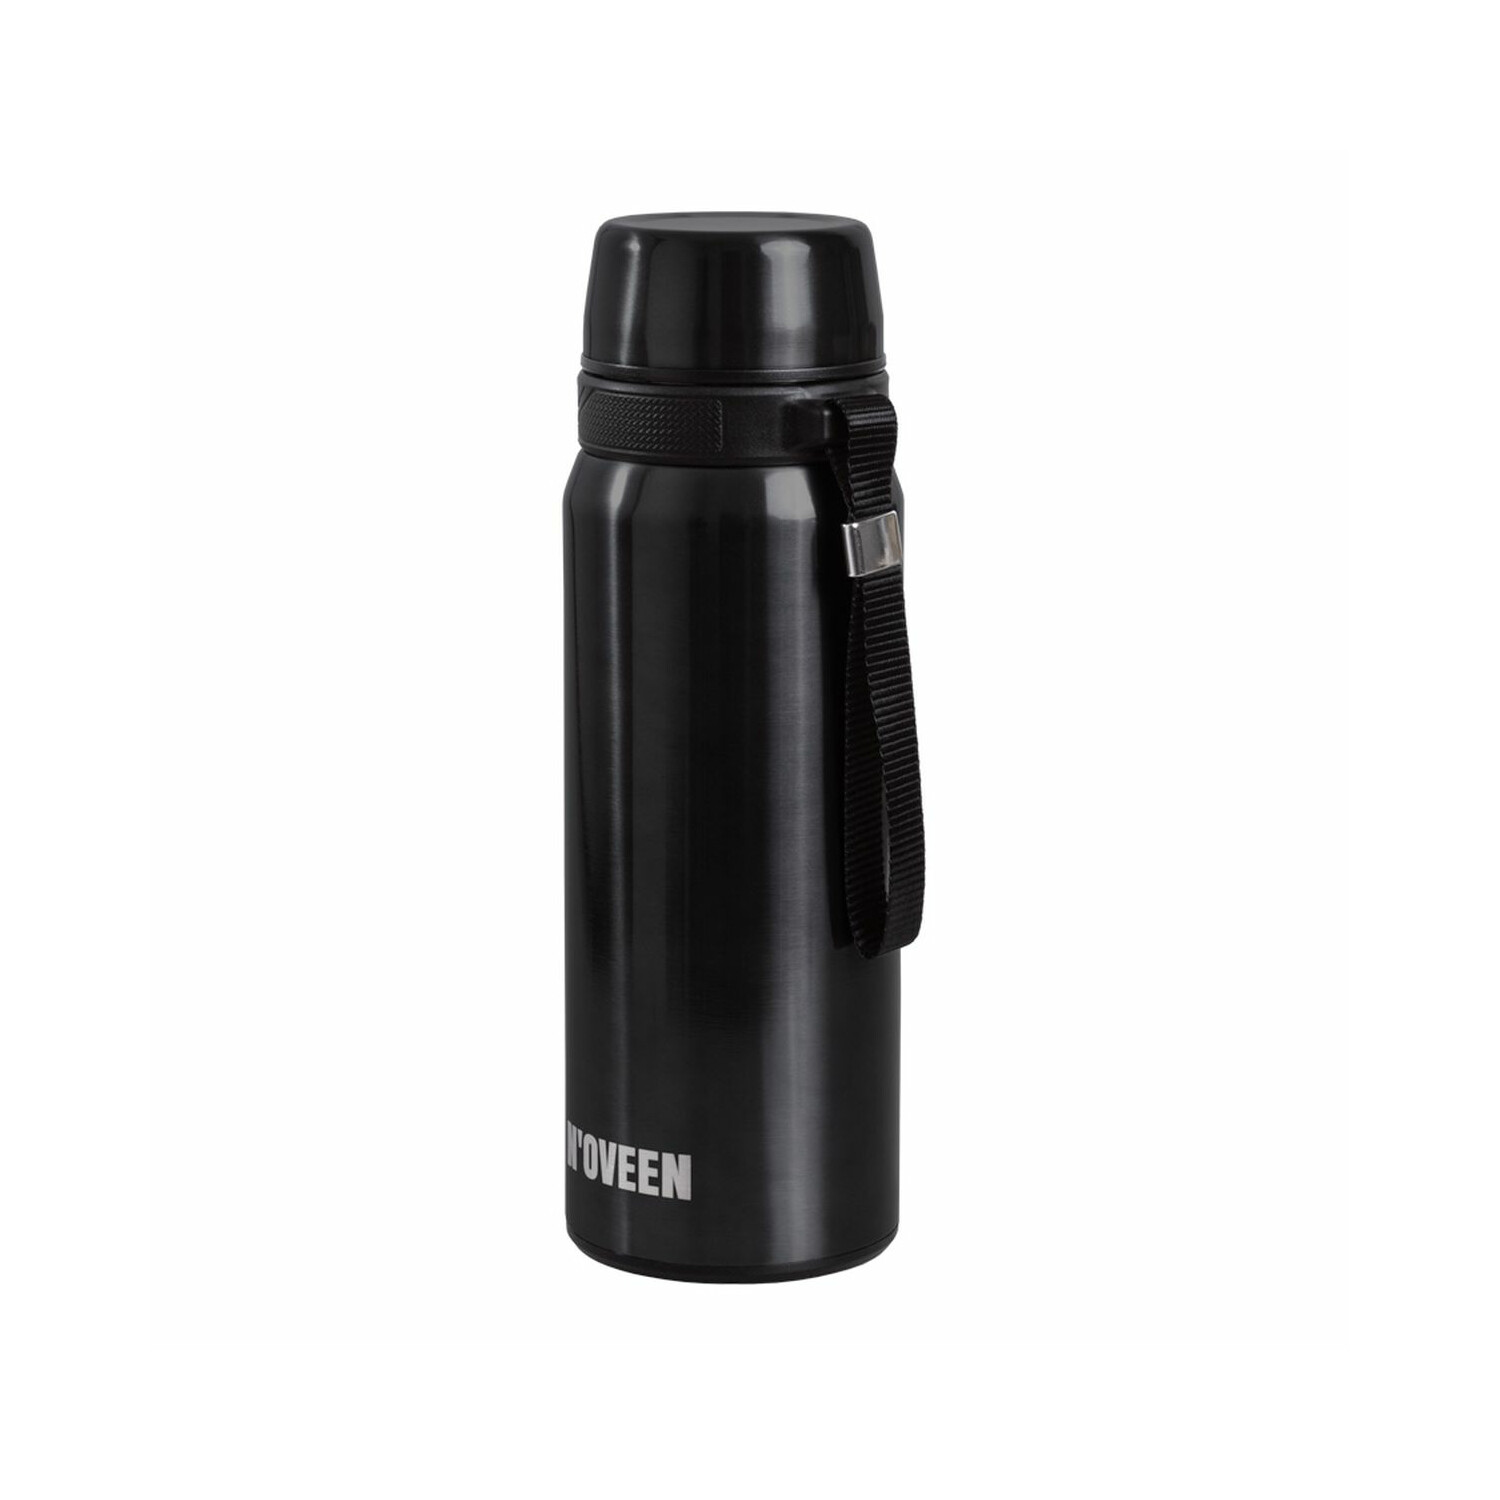 NOVEEN TB620 Thermoflasche